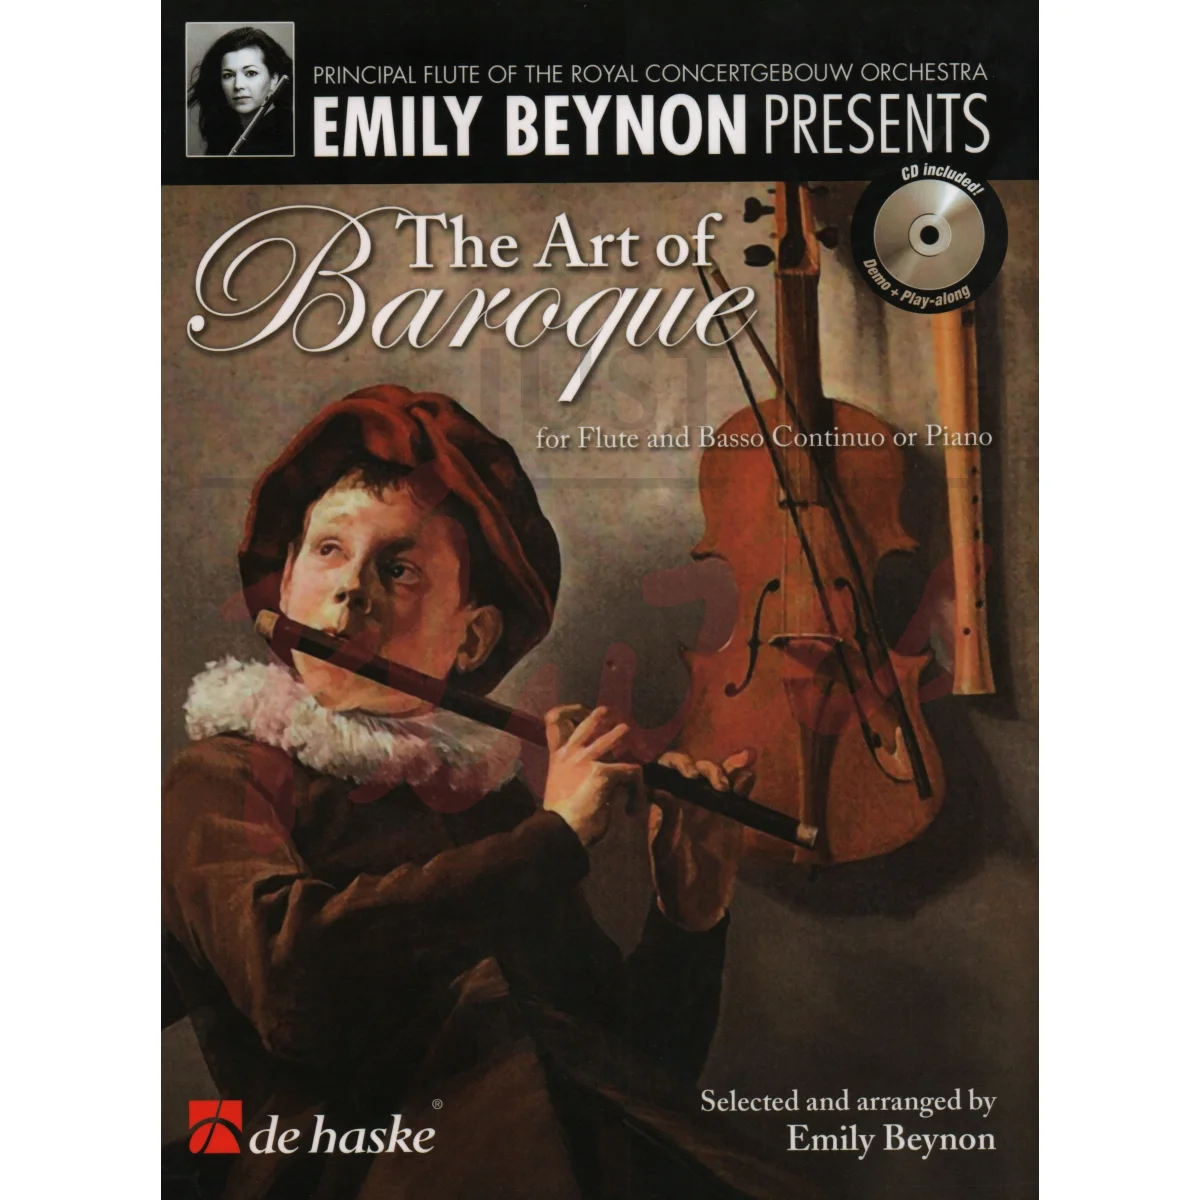 The Art of Baroque for Flute and Piano